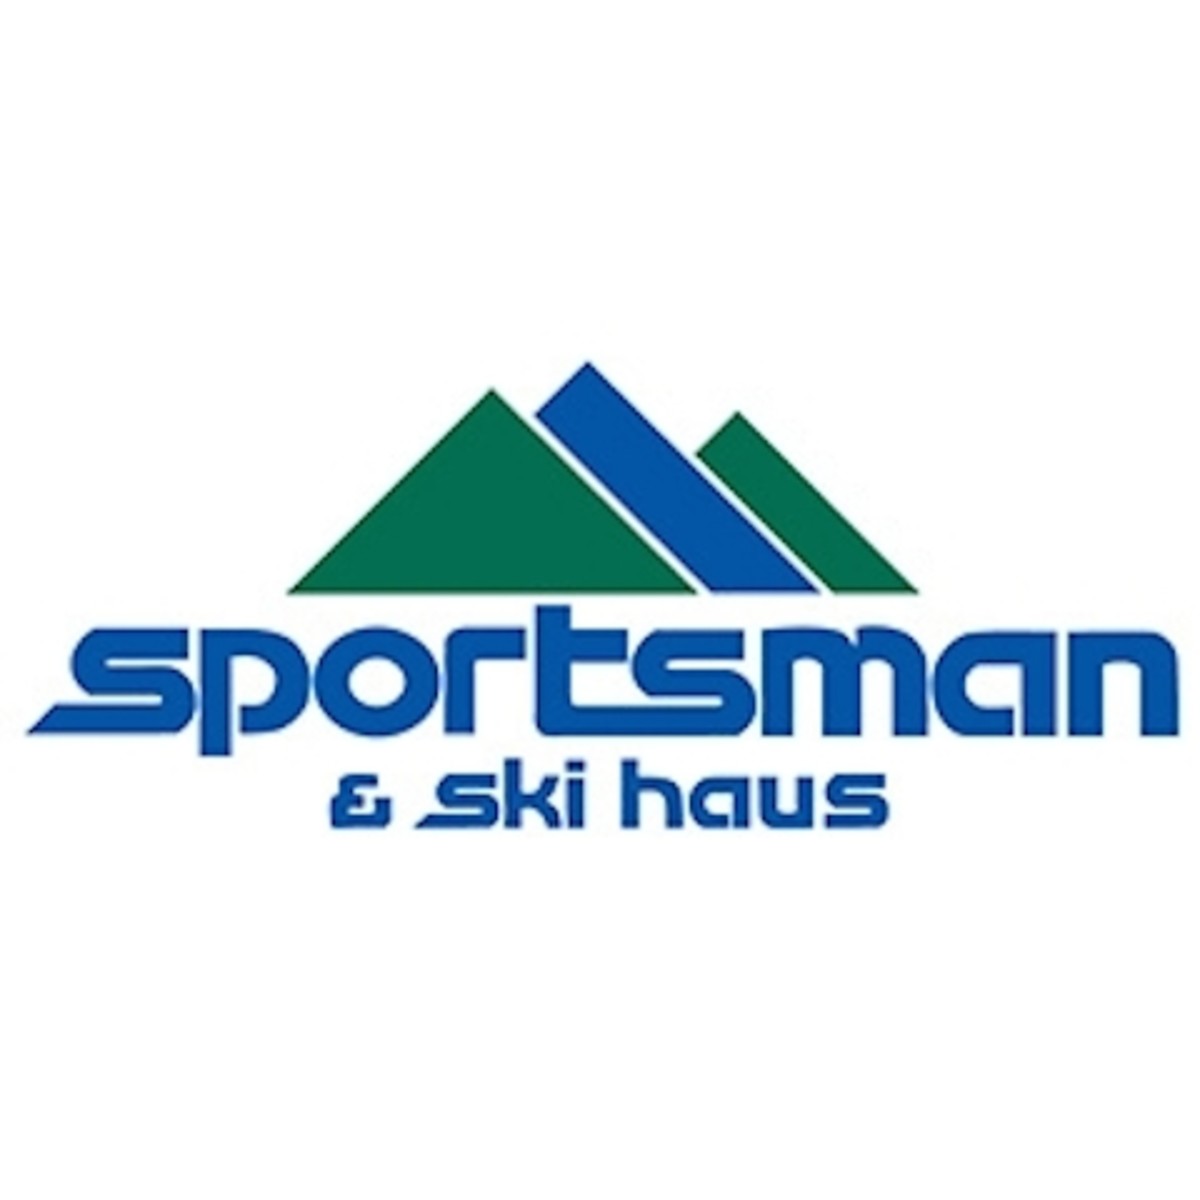 8.ski-haus-steamboat-springs-co-best-gear-stores